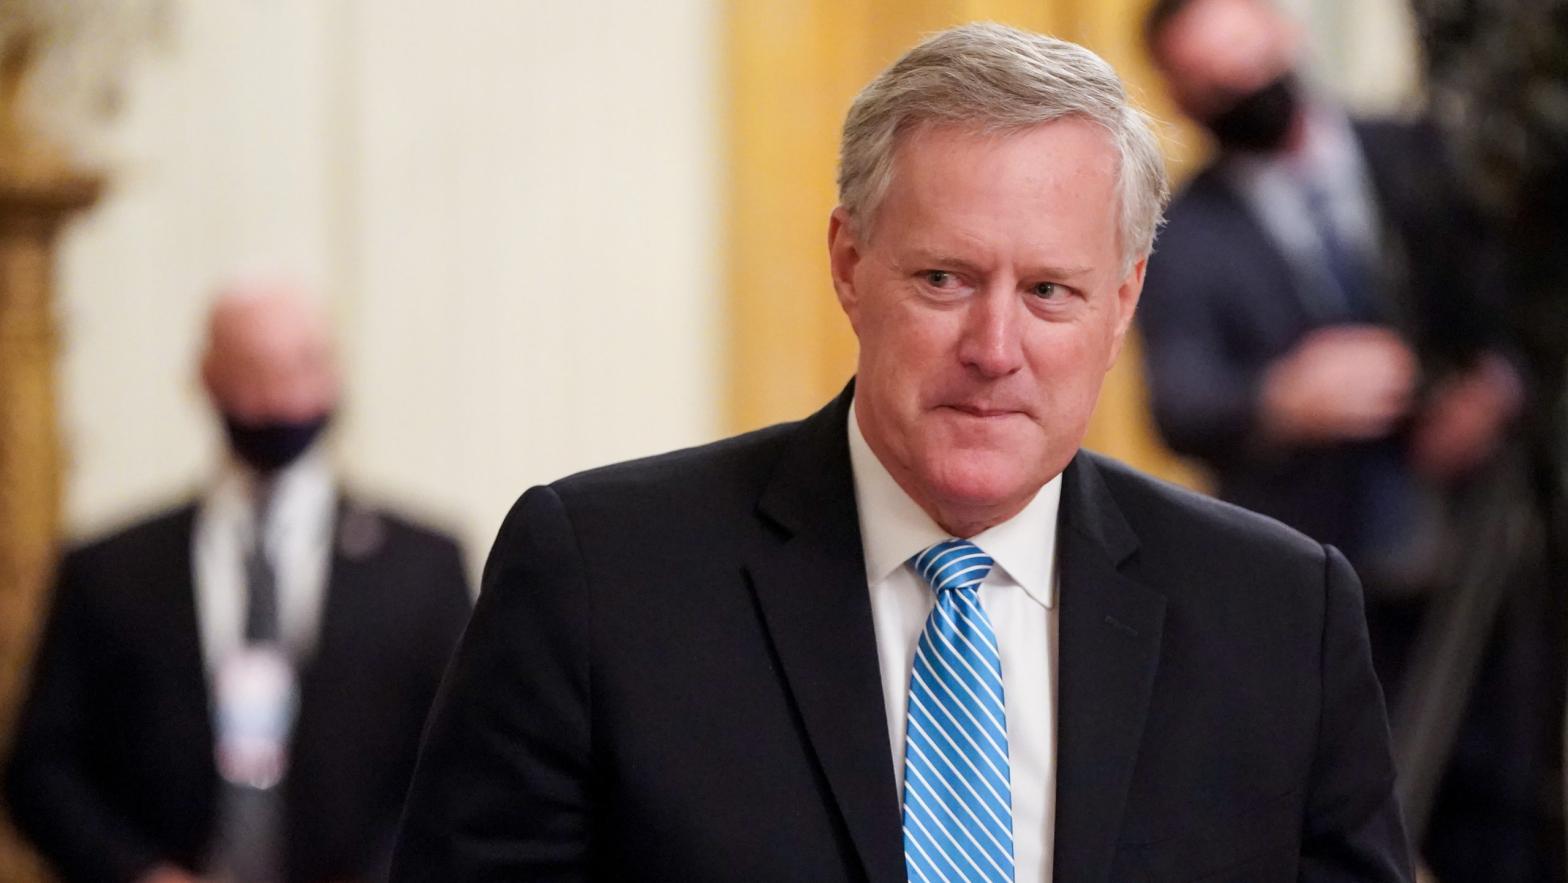 President Donald Trump's chief of staff Mark Meadows has reportedly tested positive for the coronavirus, meaning that the White House may soon be dealing with a second outbreak on top of a contentious presidential election. (Photo: Joshua Roberts, Getty Images)